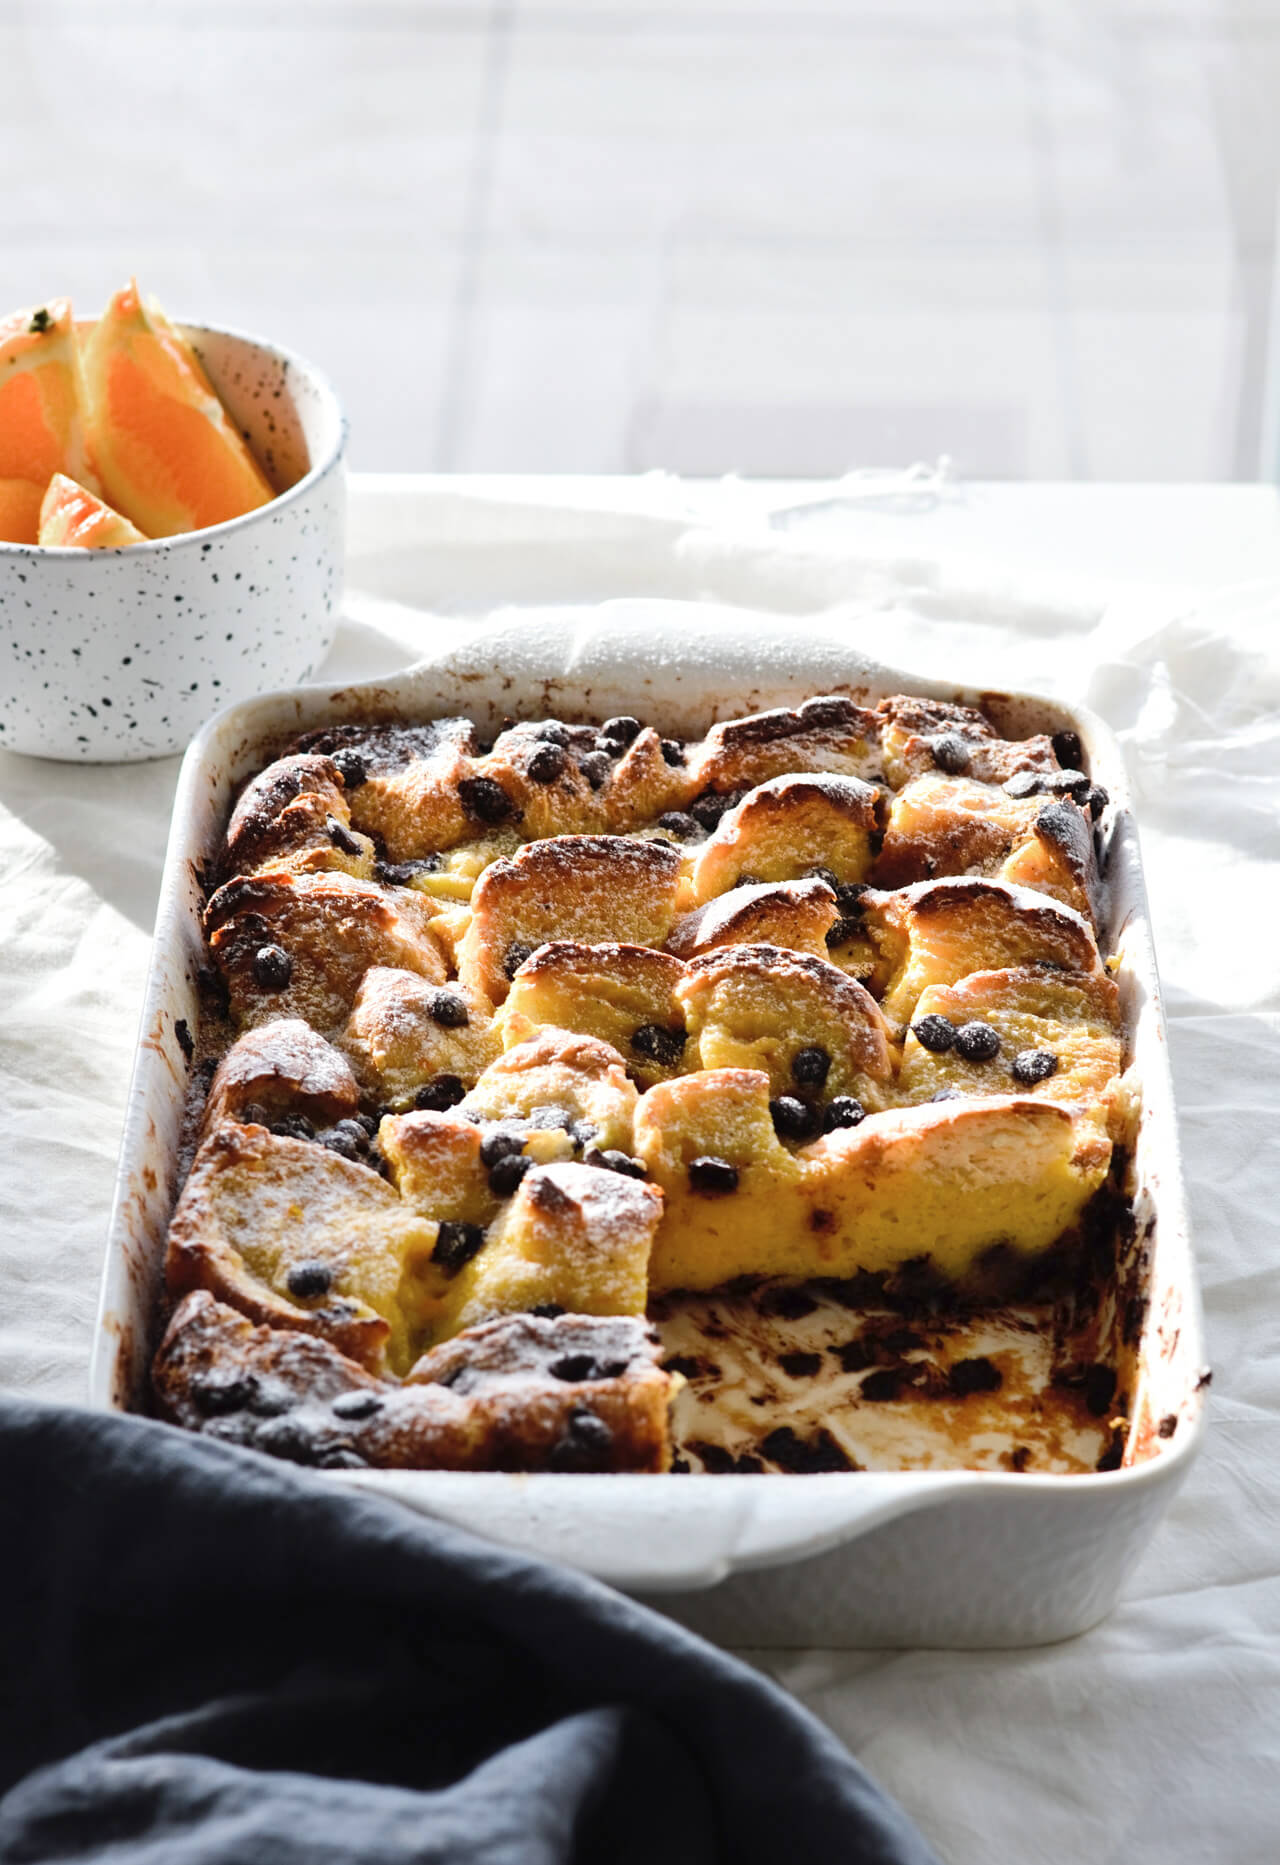 Easy to make orange chocolate chip bread pudding, made with challah and topped with whipped cream. Perfect brunch or dessert!